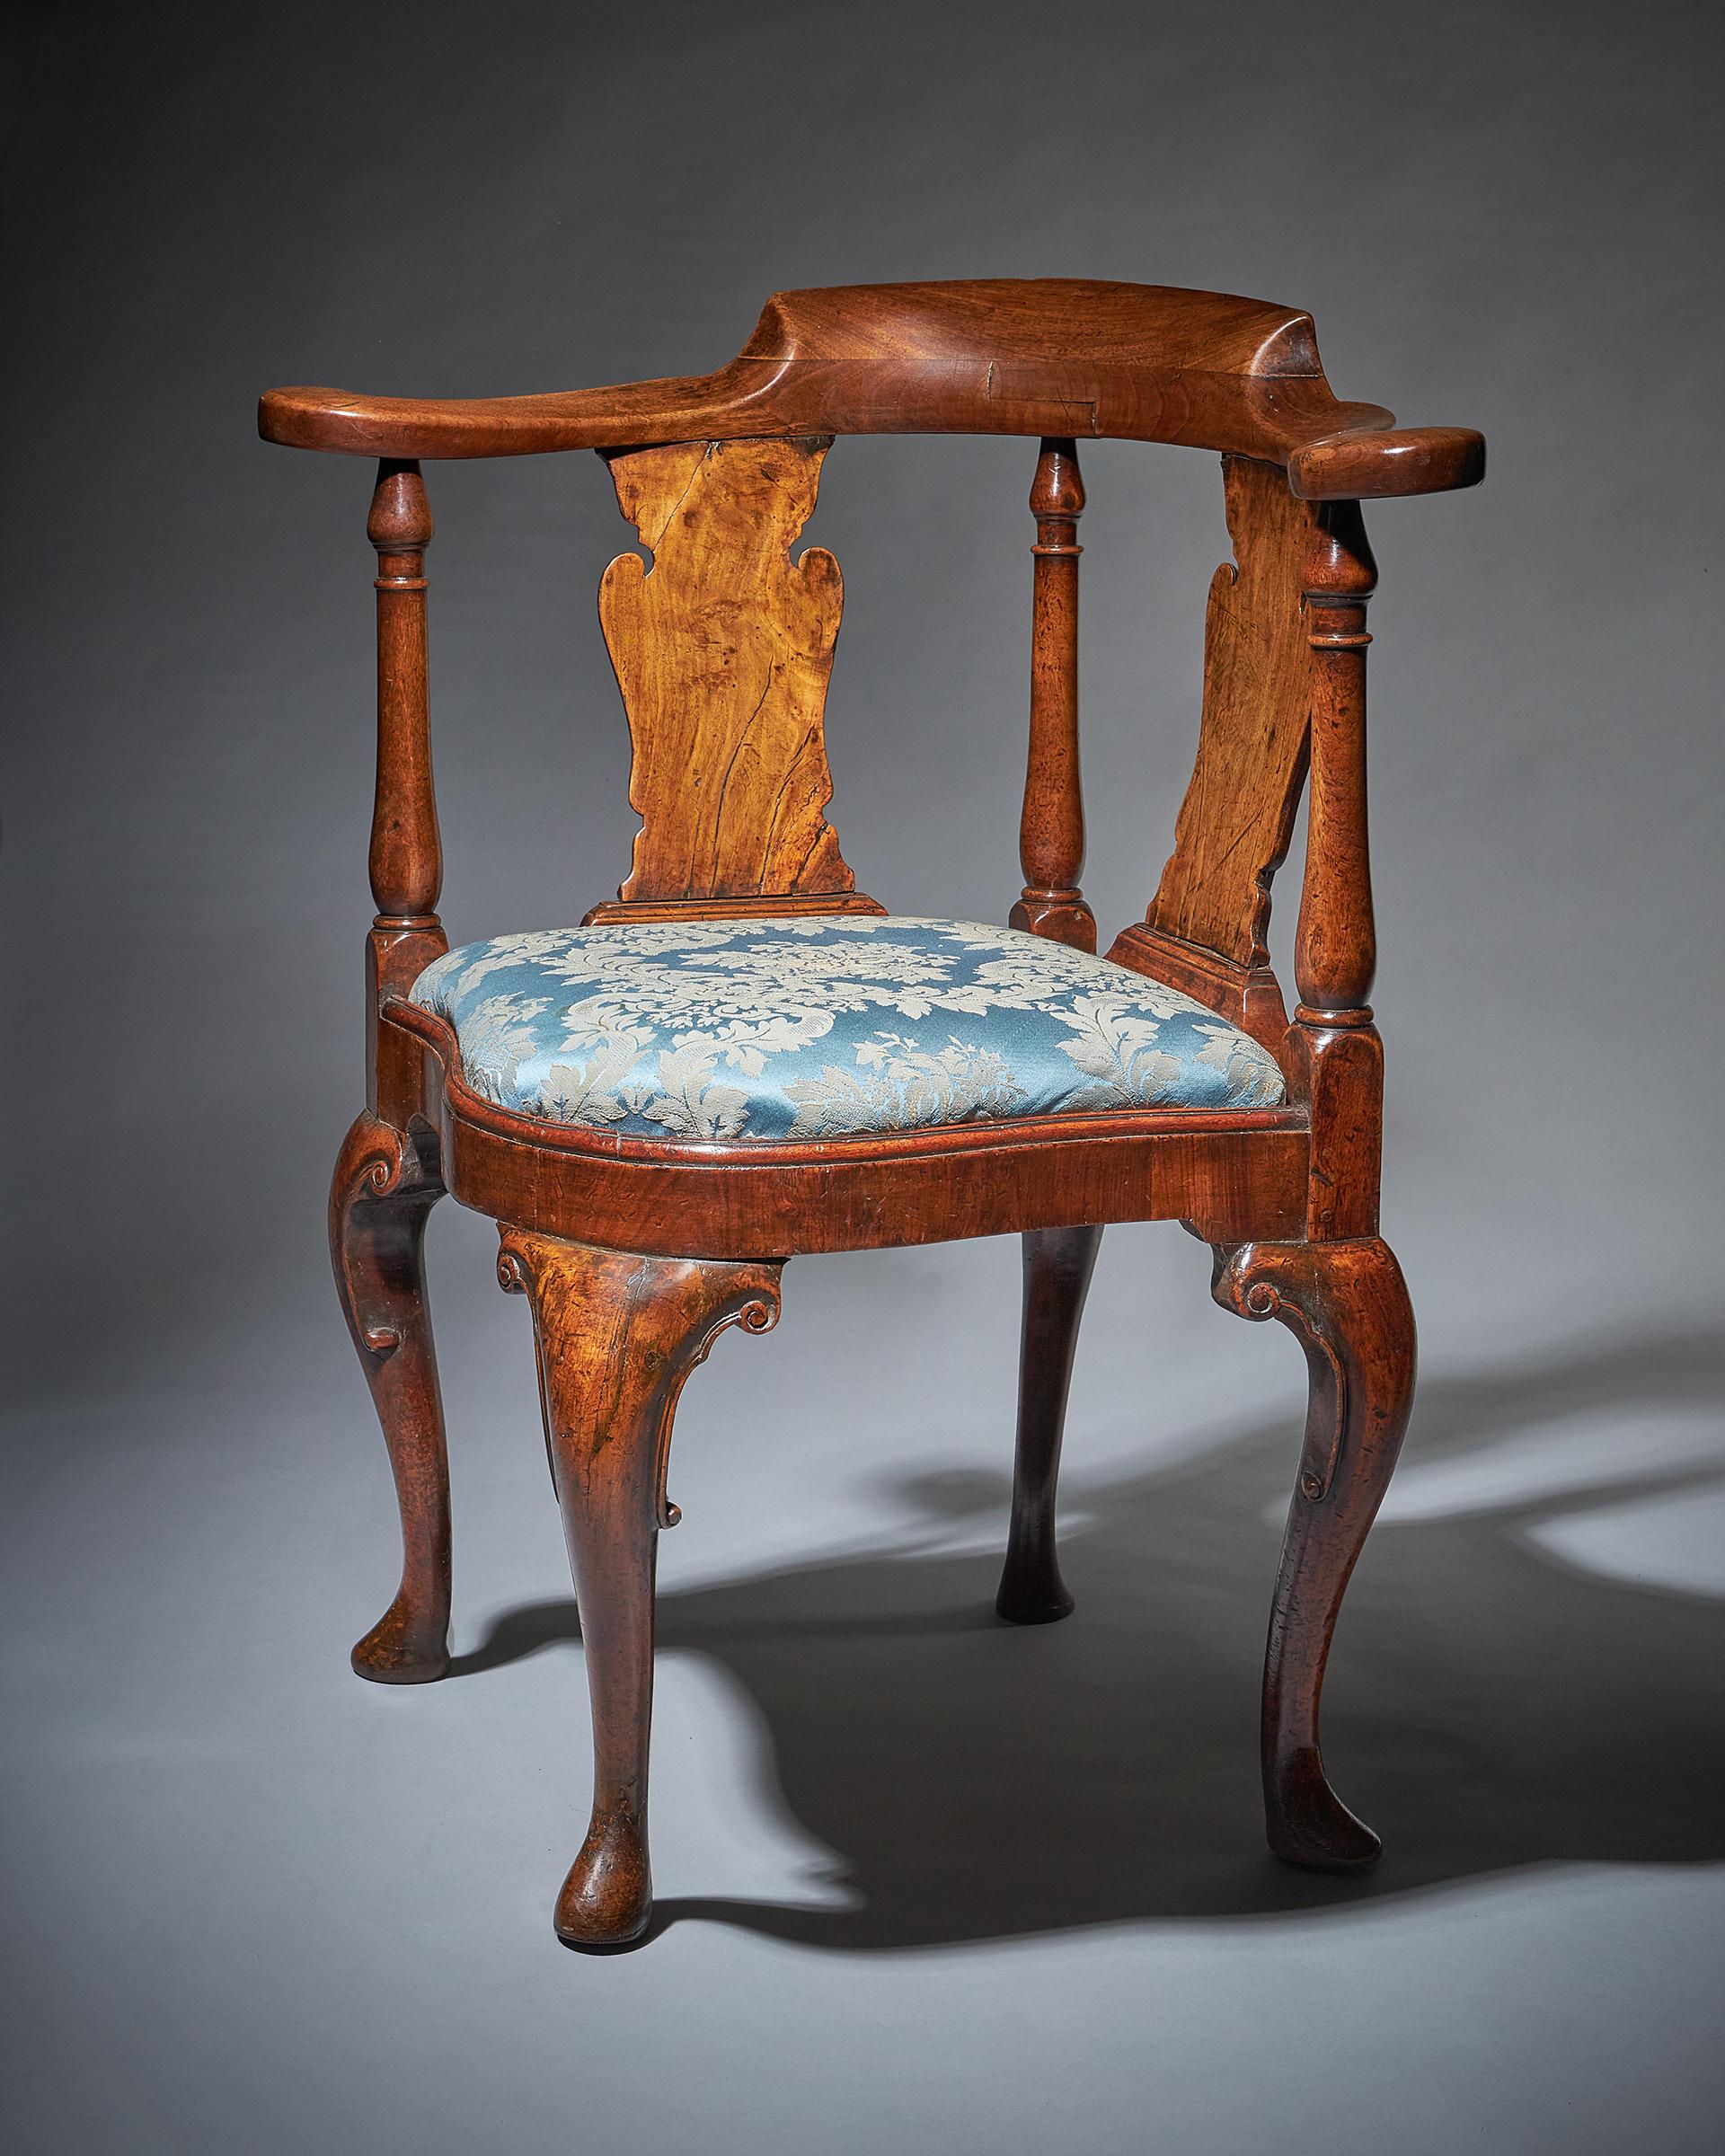 Queen Anne period walnut corner chair, 1702-1714.

It is solid walnut, raised on four boldly carved cabriole legs with C-scrolls and pad feet. The seat is known as bell-shaped. The solid walnut carved horseshoe crest rail is raised by three